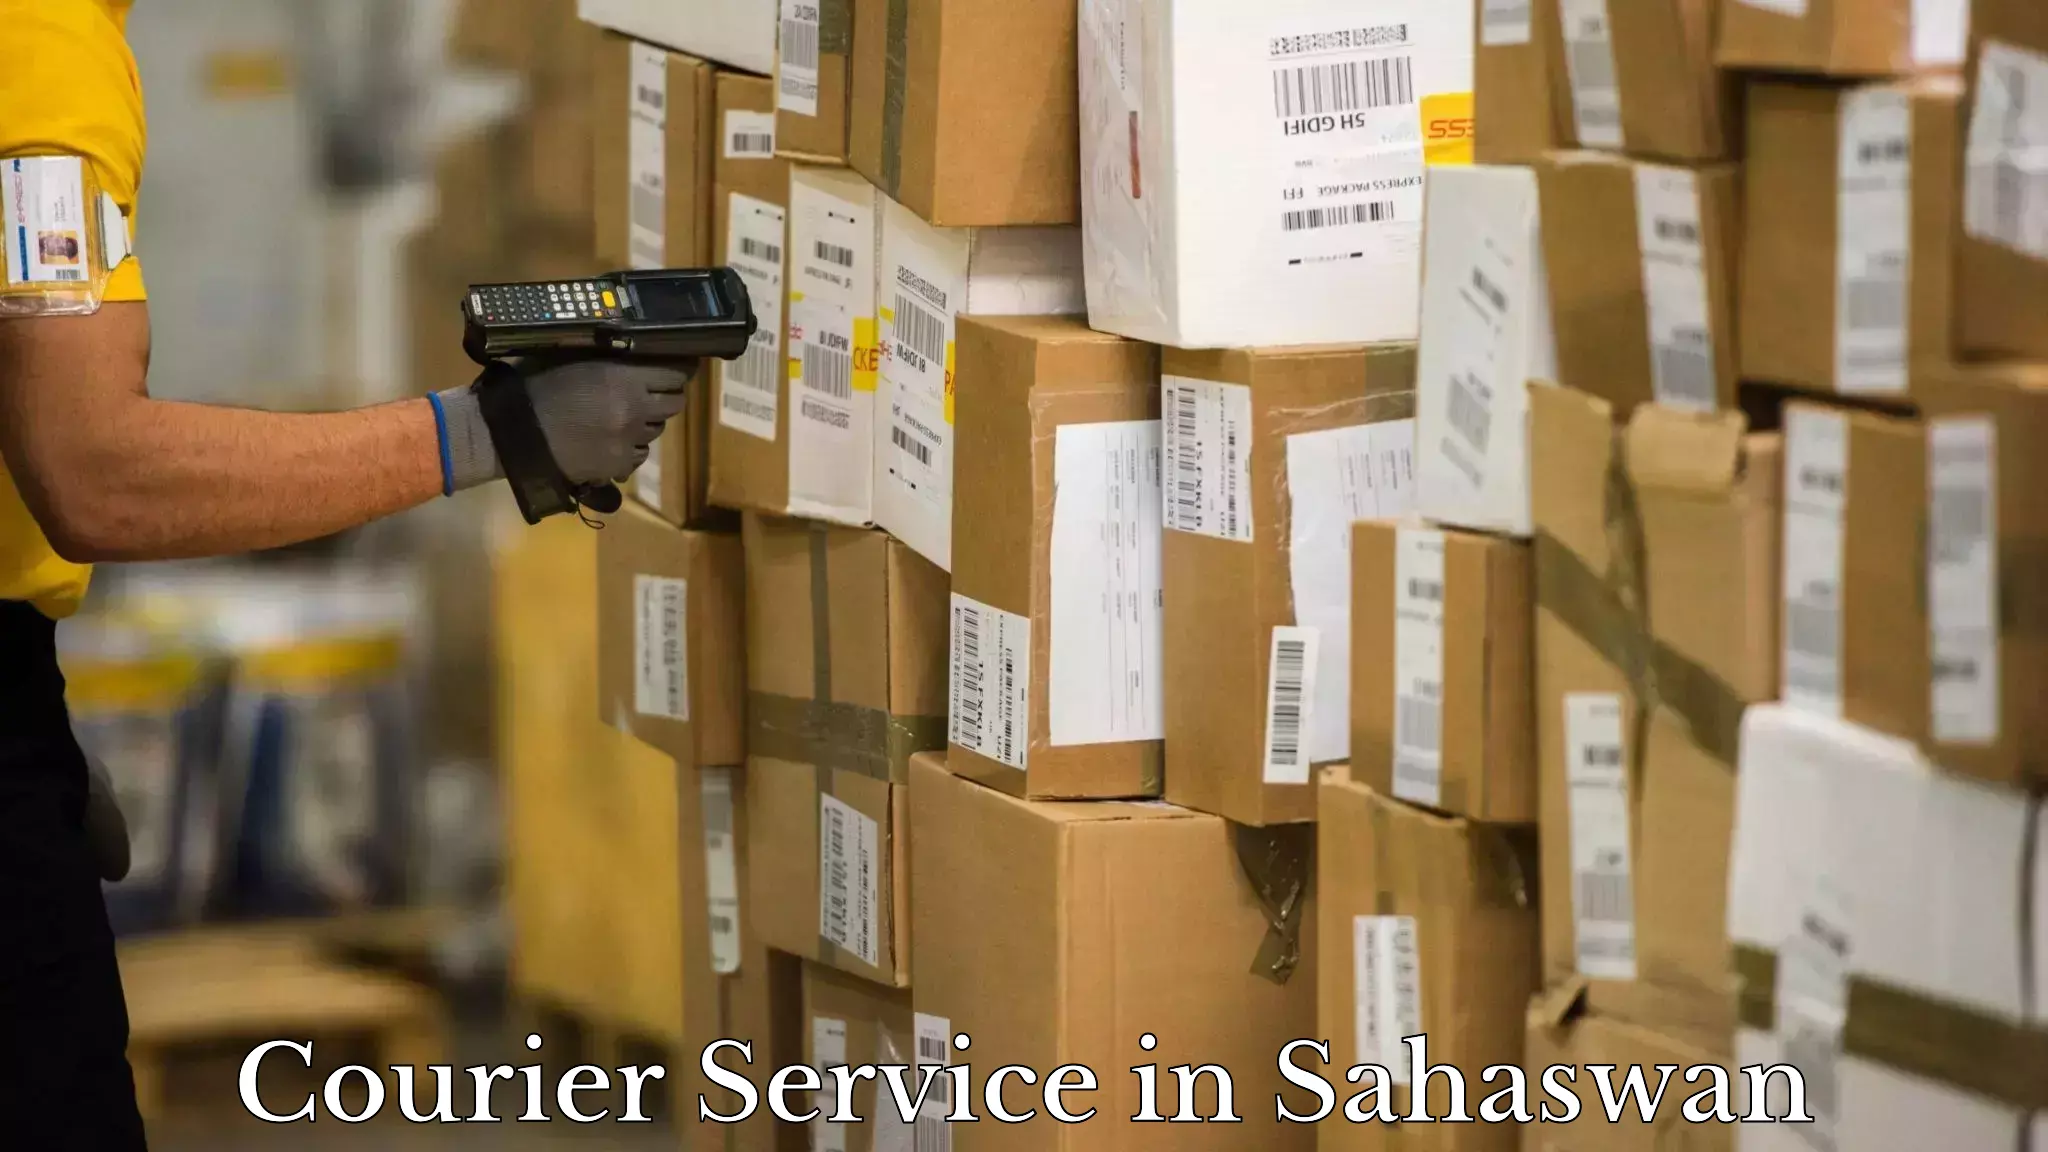 Express delivery solutions in Sahaswan